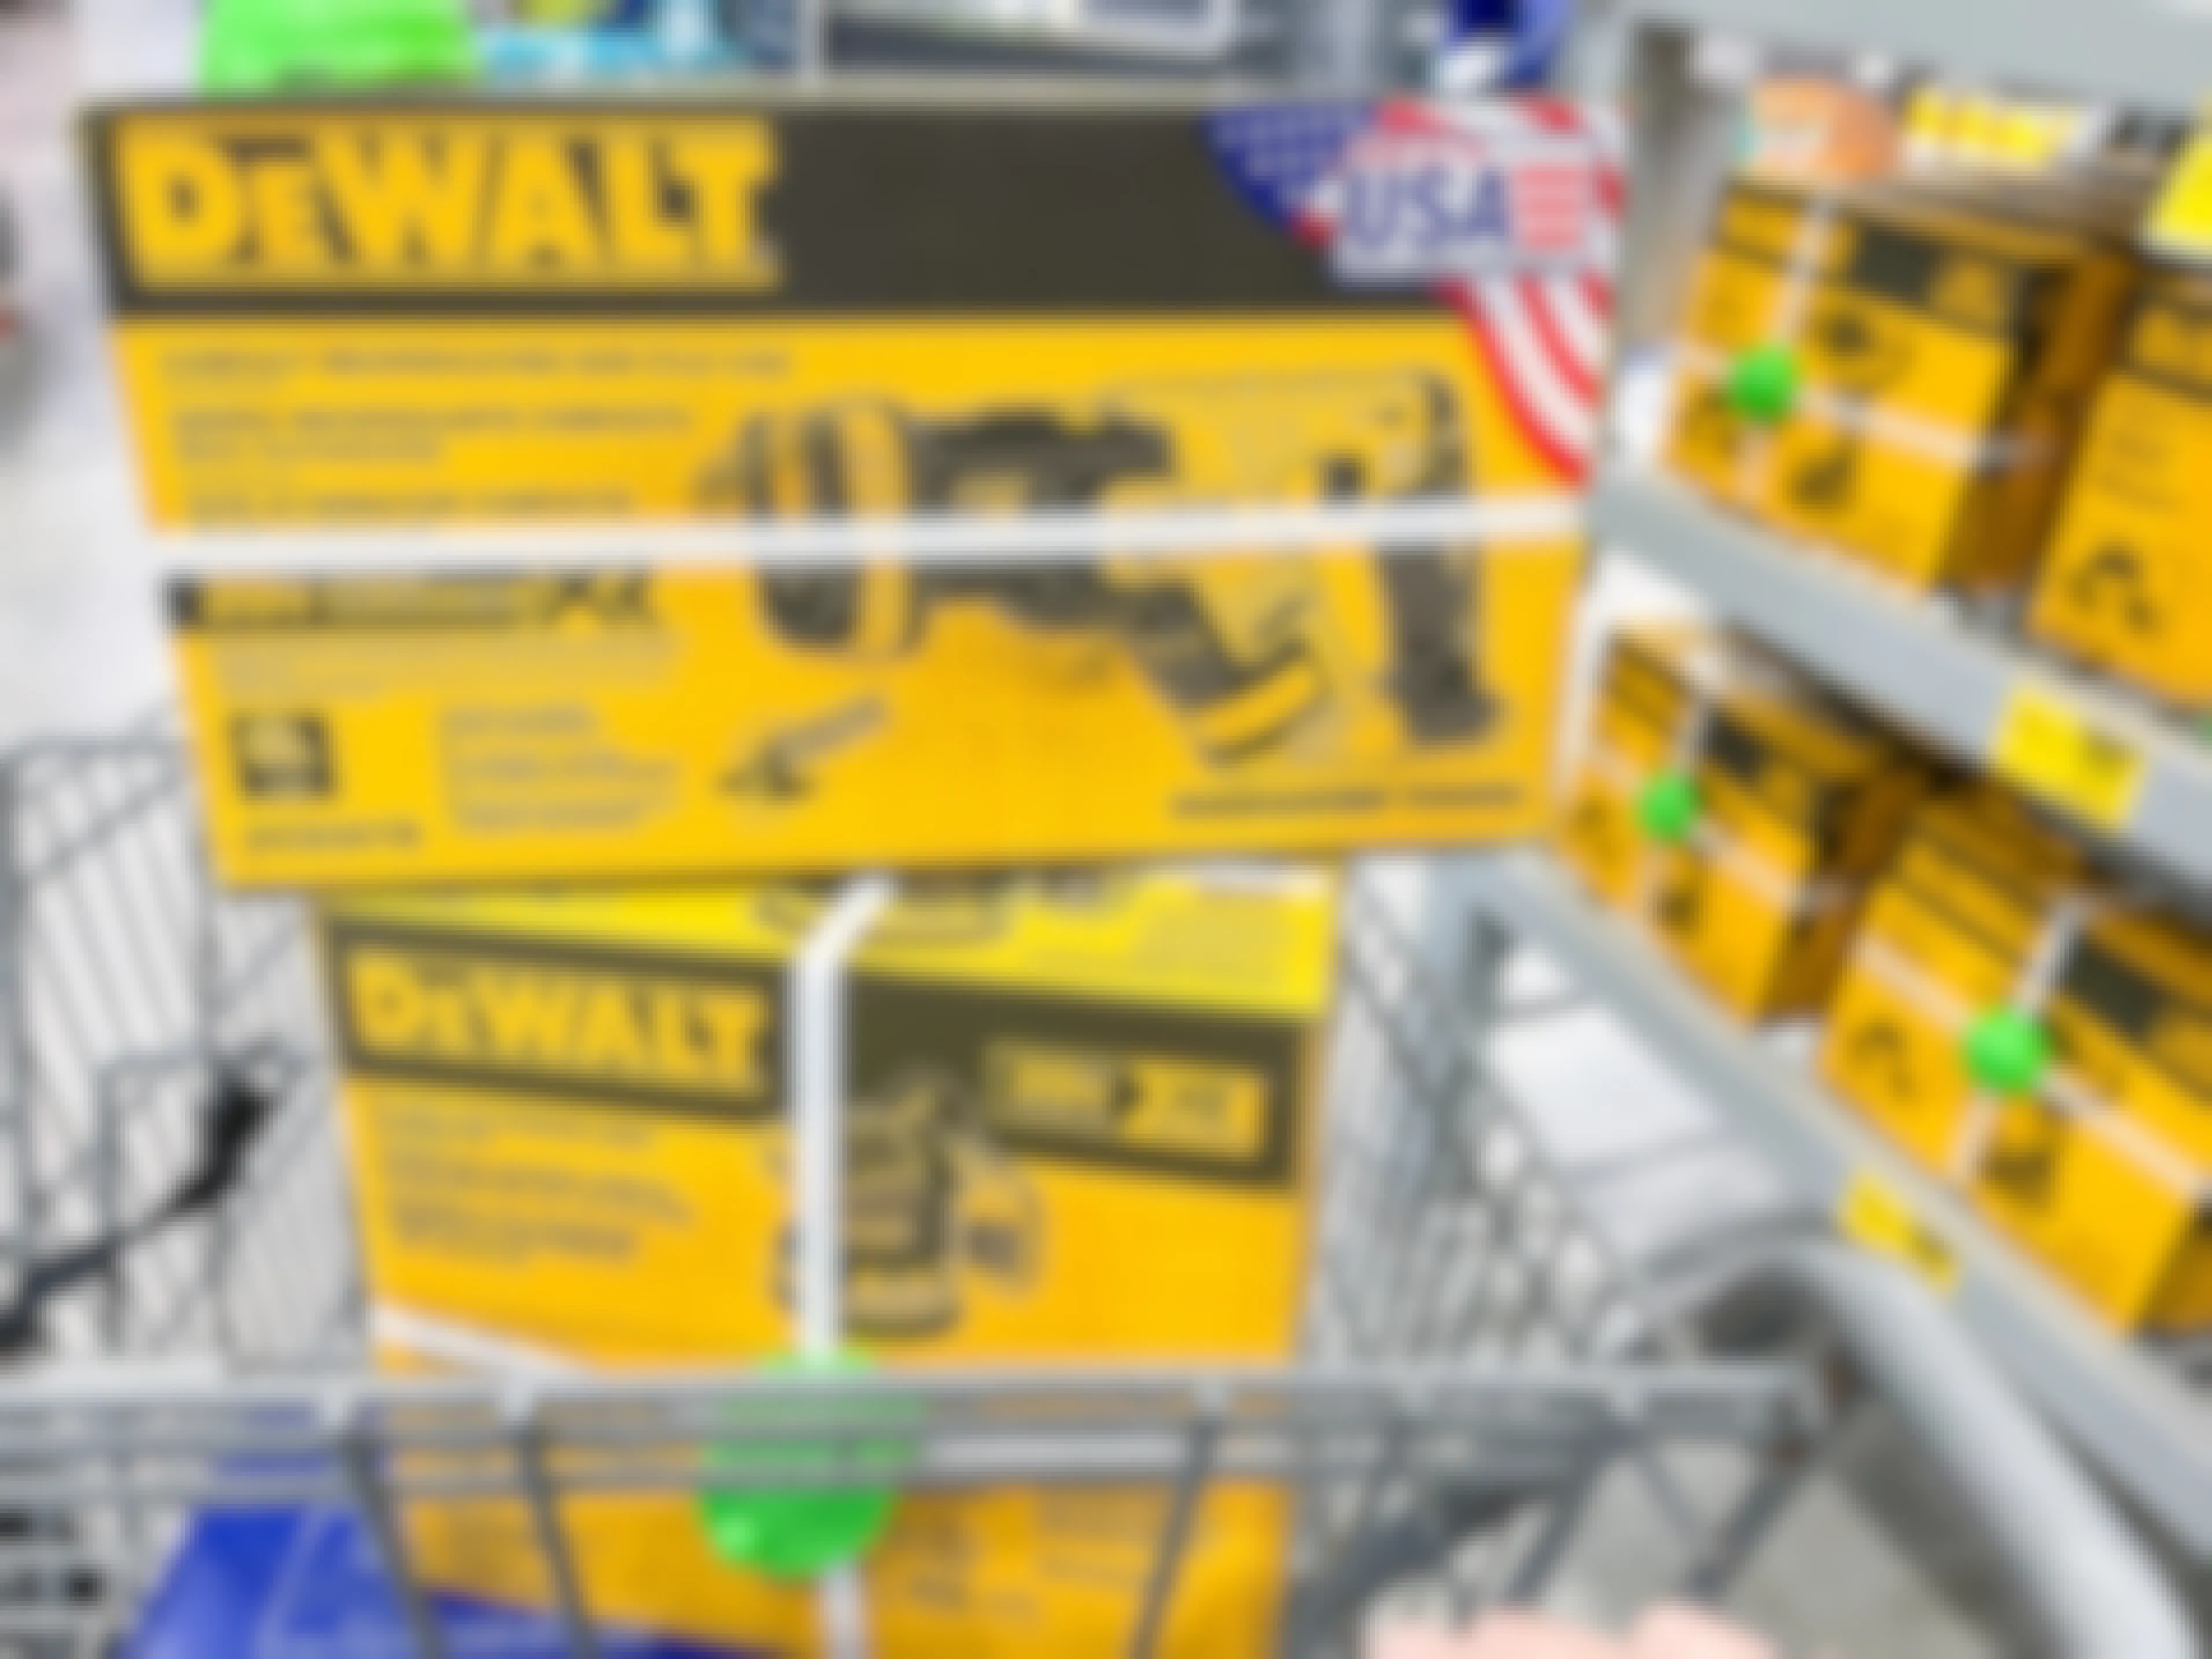 Dewalt power tools in their boxes, sitting in the basket of a shopping cart at Lowe's black friday..